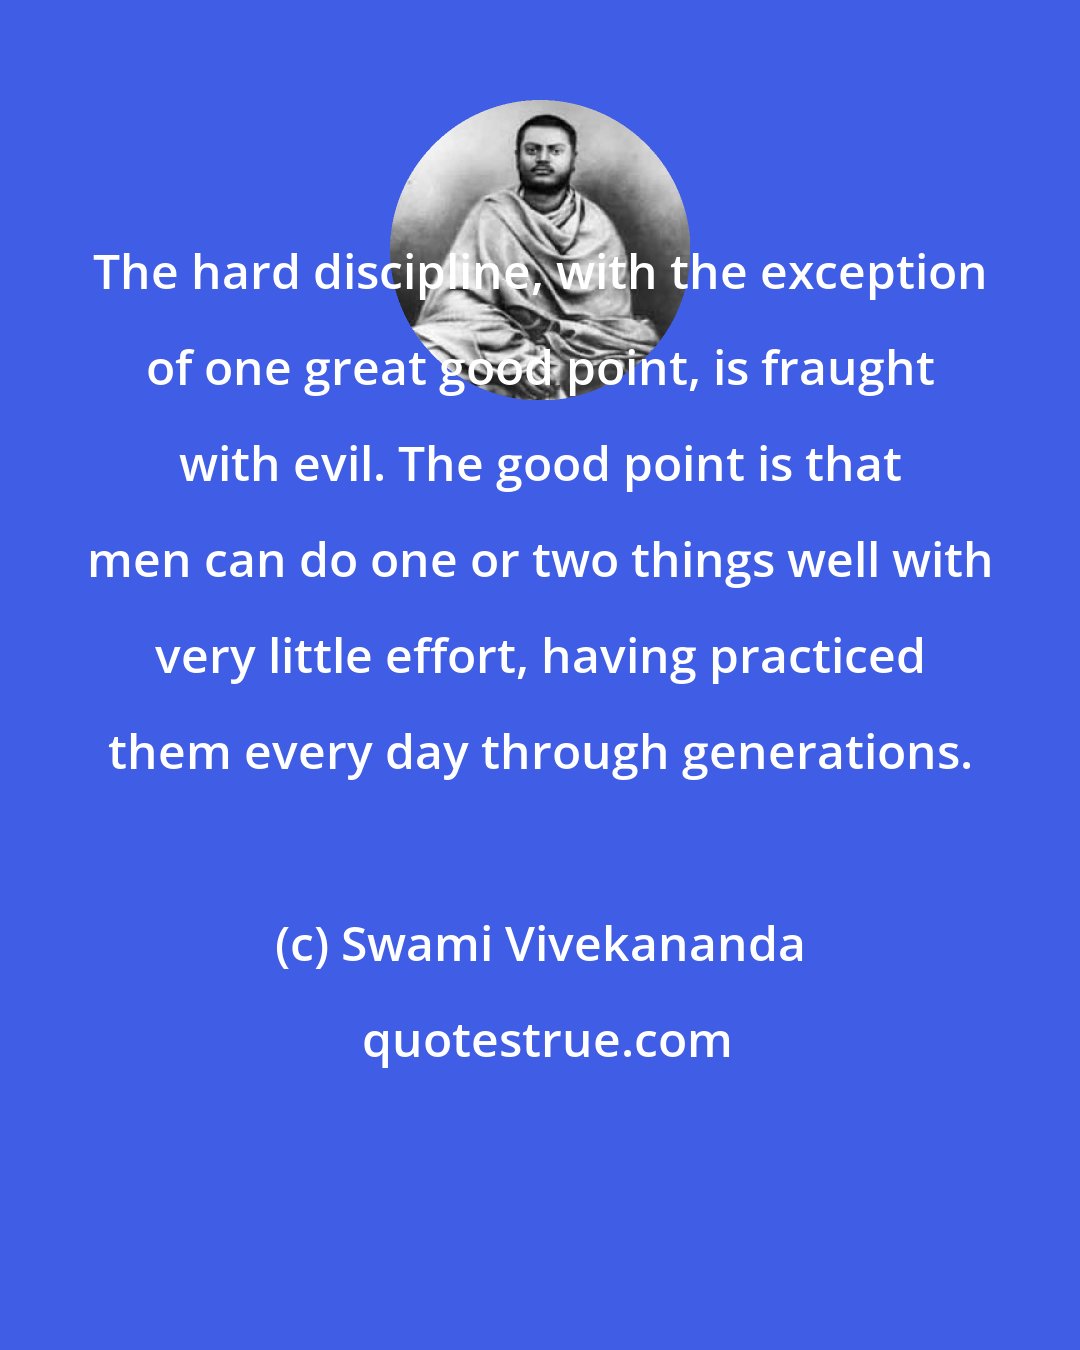 Swami Vivekananda: The hard discipline, with the exception of one great good point, is fraught with evil. The good point is that men can do one or two things well with very little effort, having practiced them every day through generations.